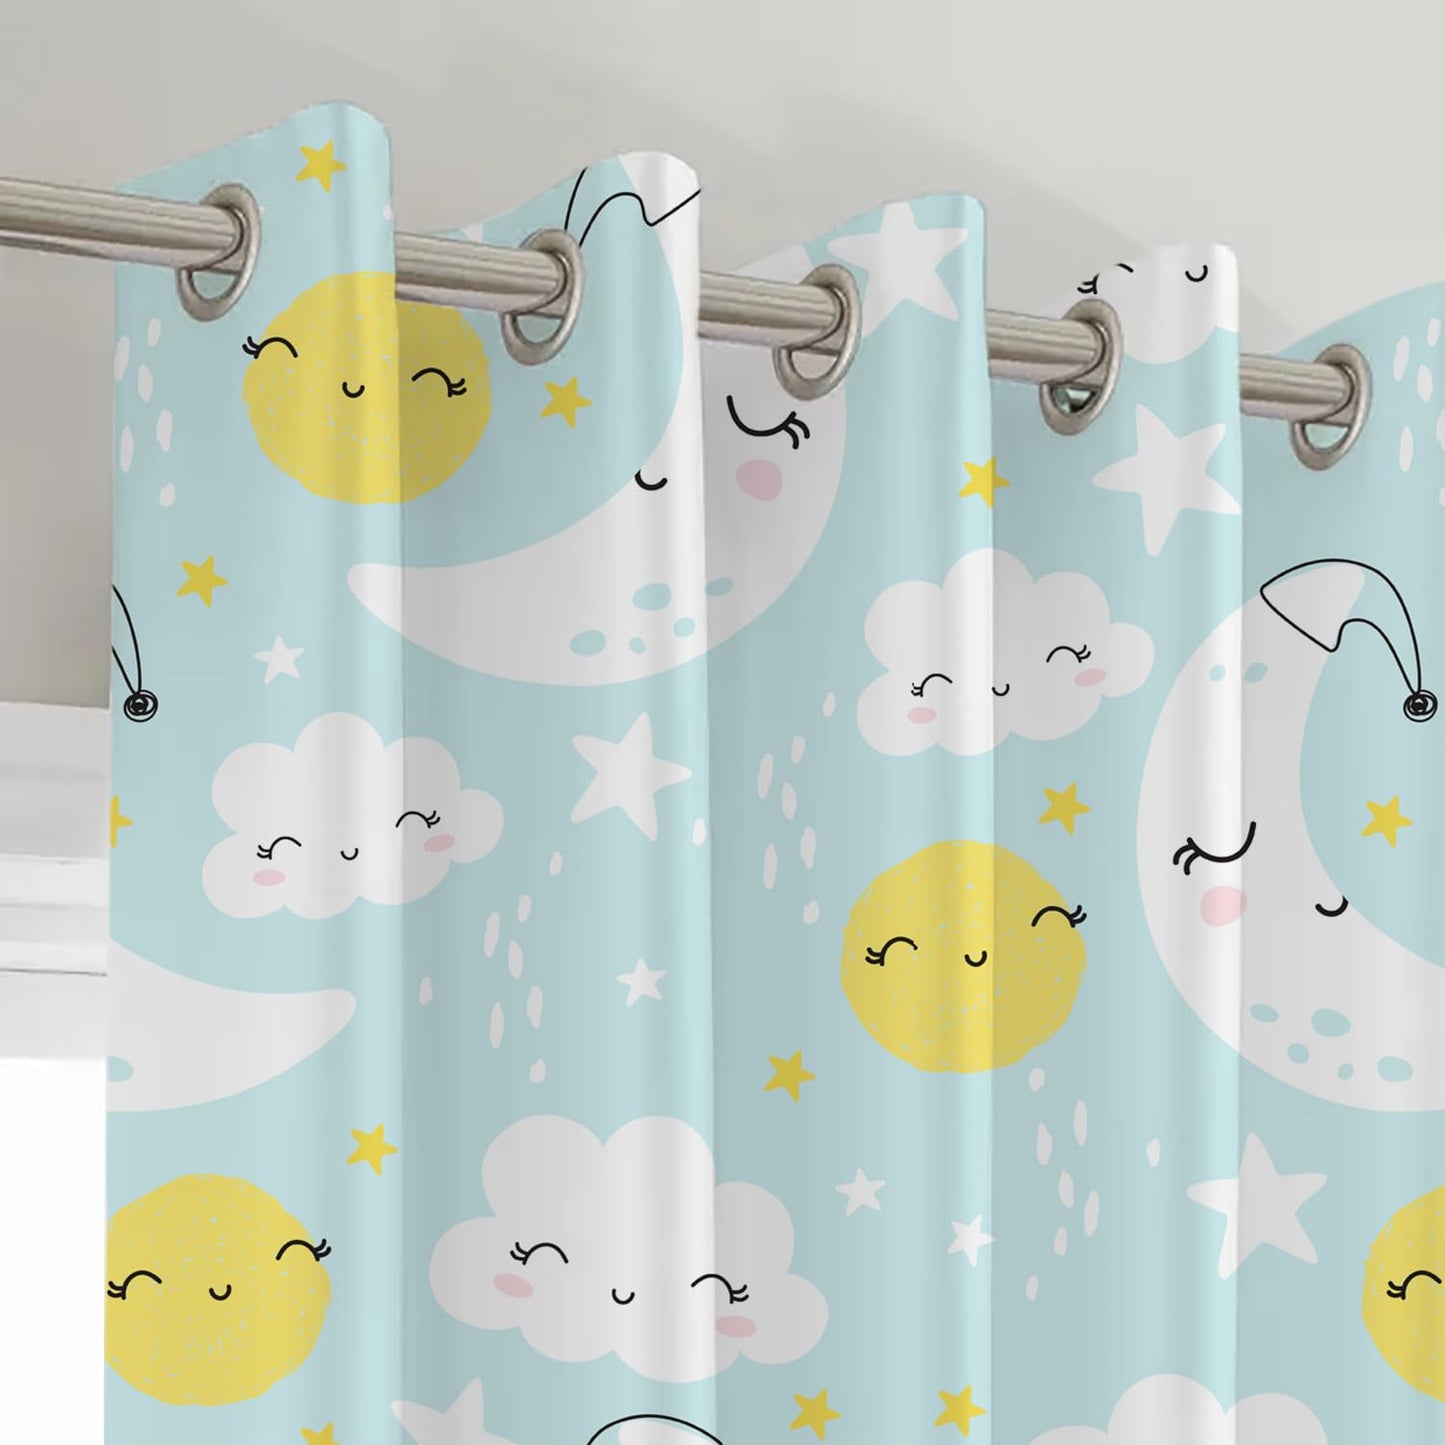 Whimsical design of sun, moon, and clouds on blue and yellow curtain.